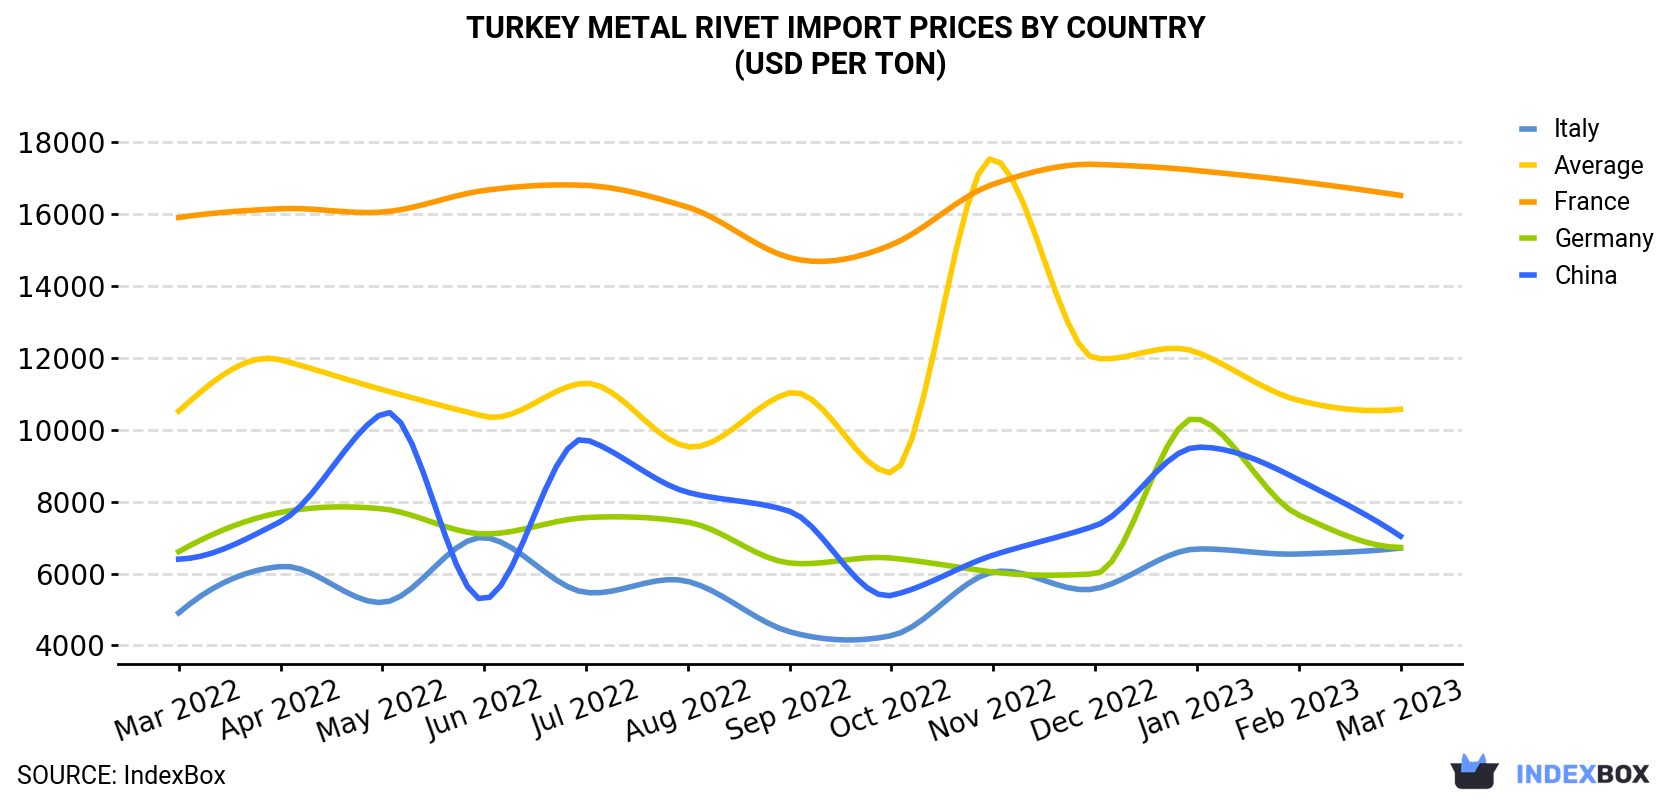 Turkey Metal Rivet Import Prices By Country (USD Per Ton)